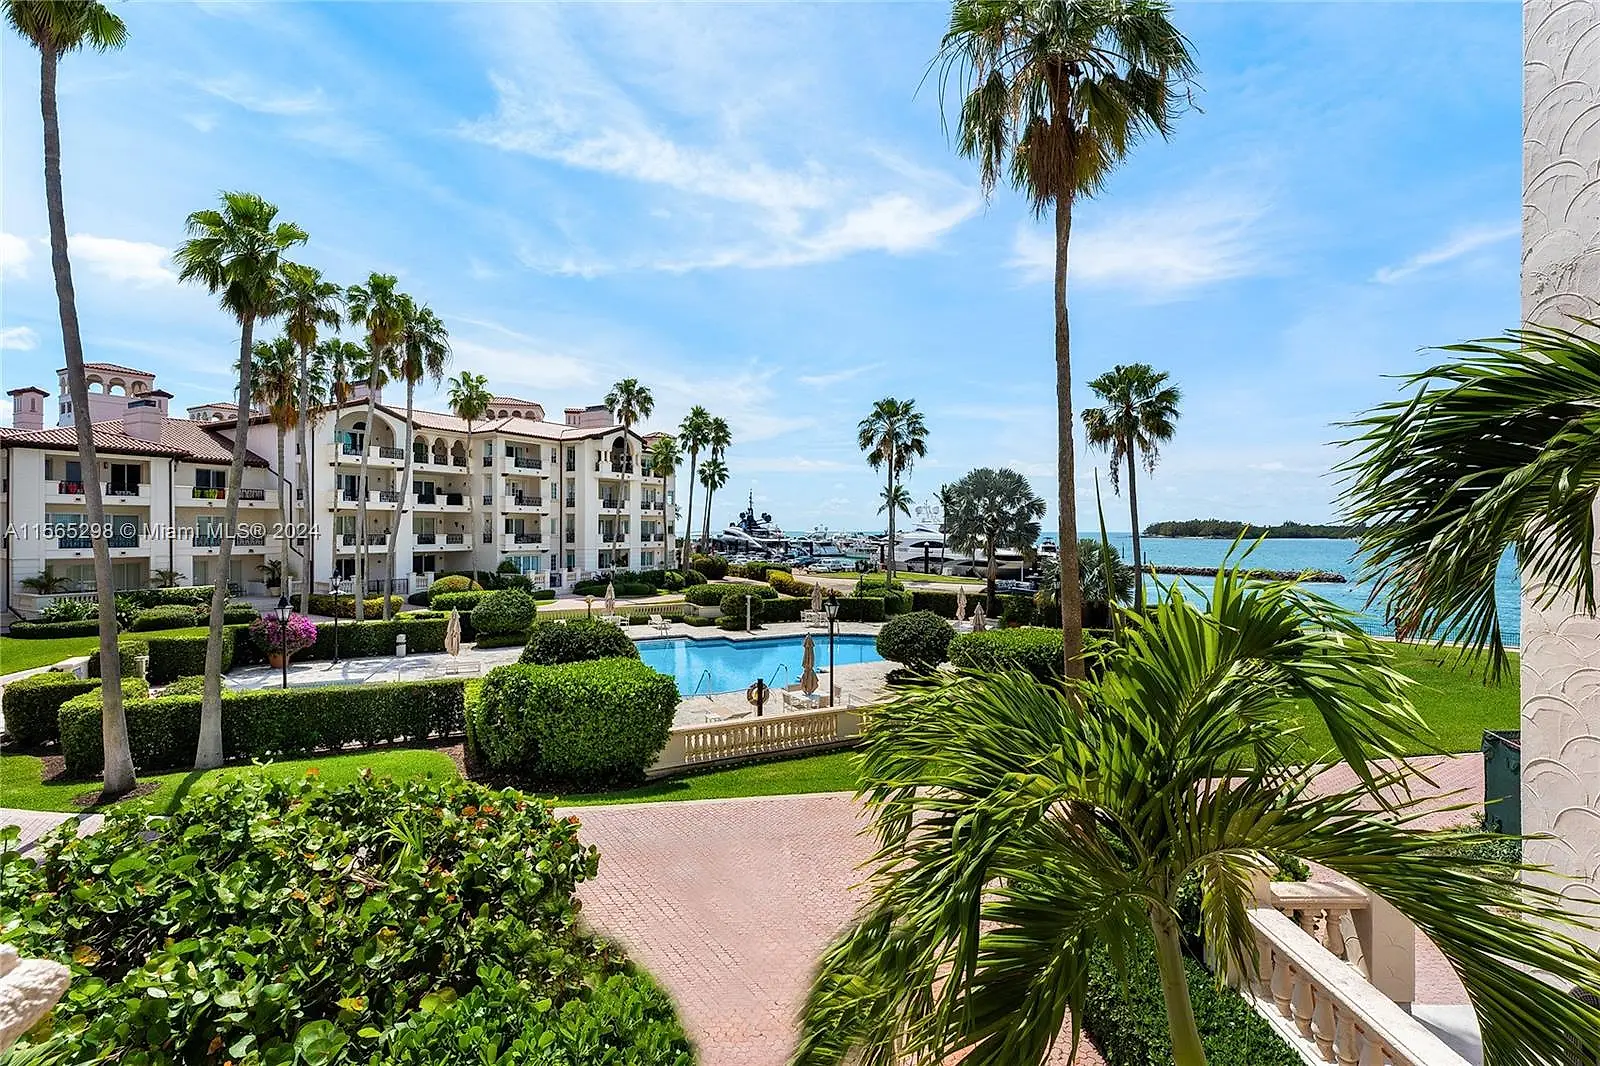 2221 Fisher Island Dr